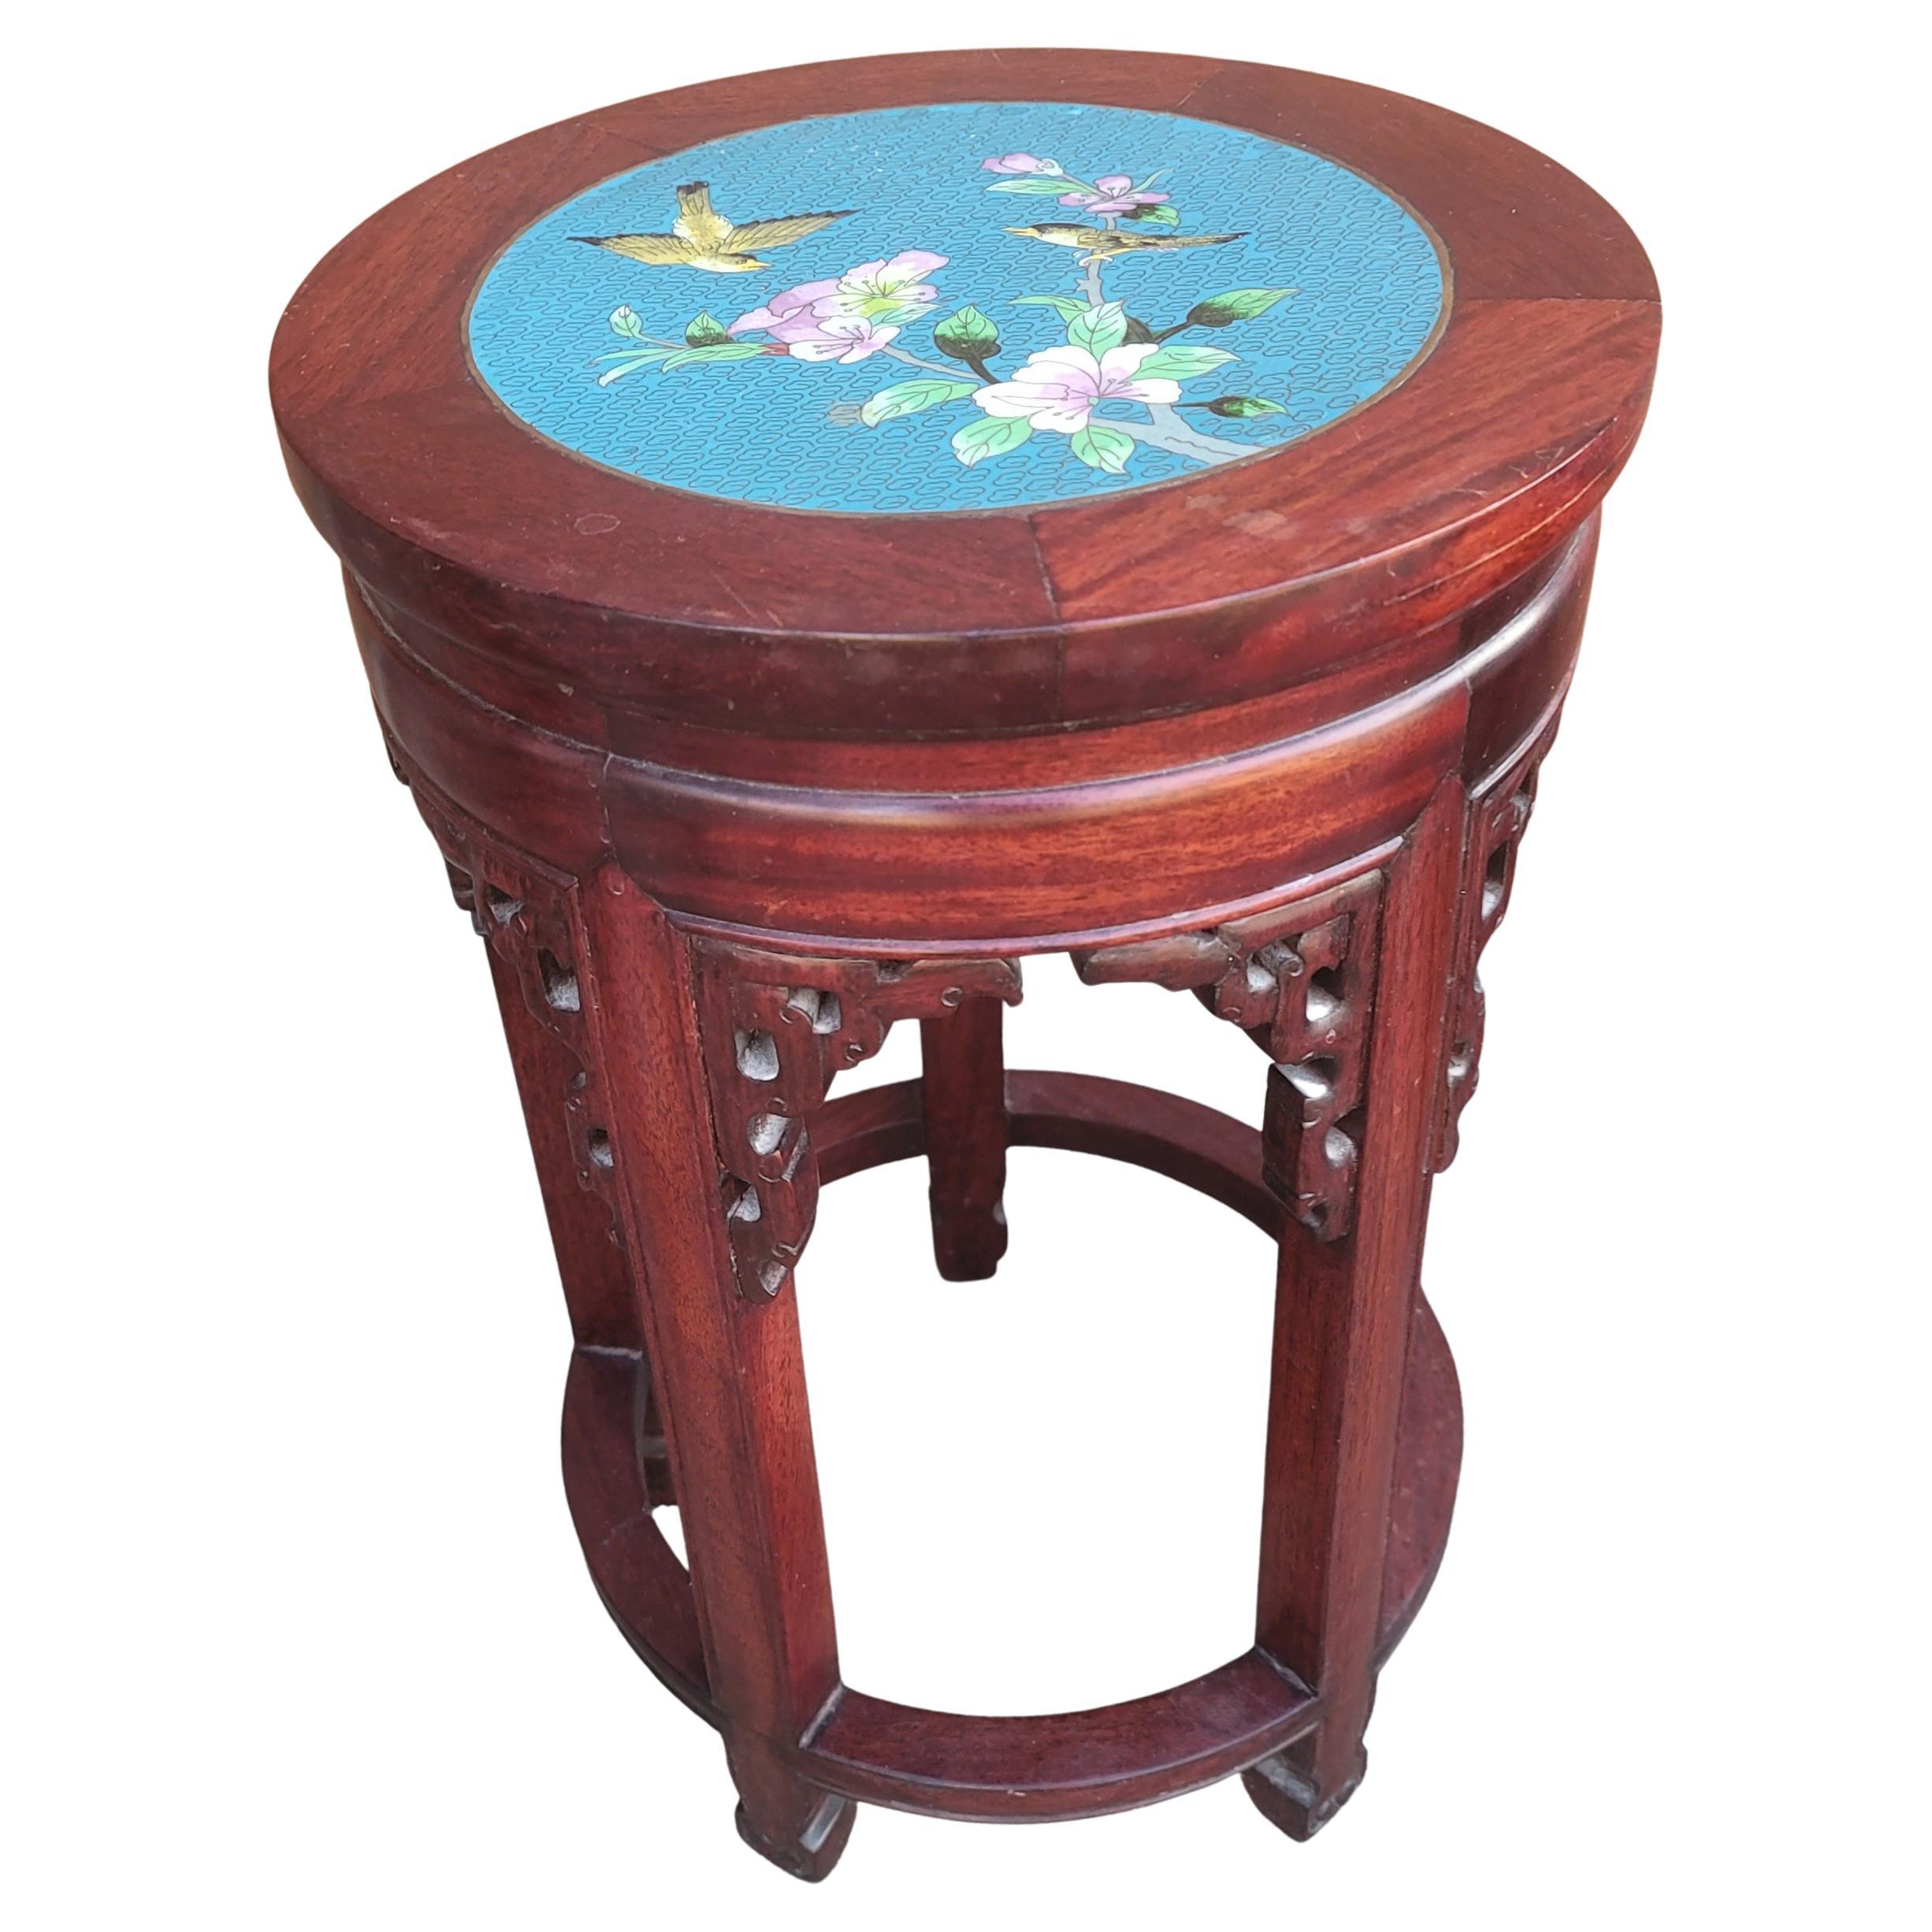 Antique Chinese carved rosewood and floral enamel cloisonné stool or side table. Refinished rosewood. Measures 12